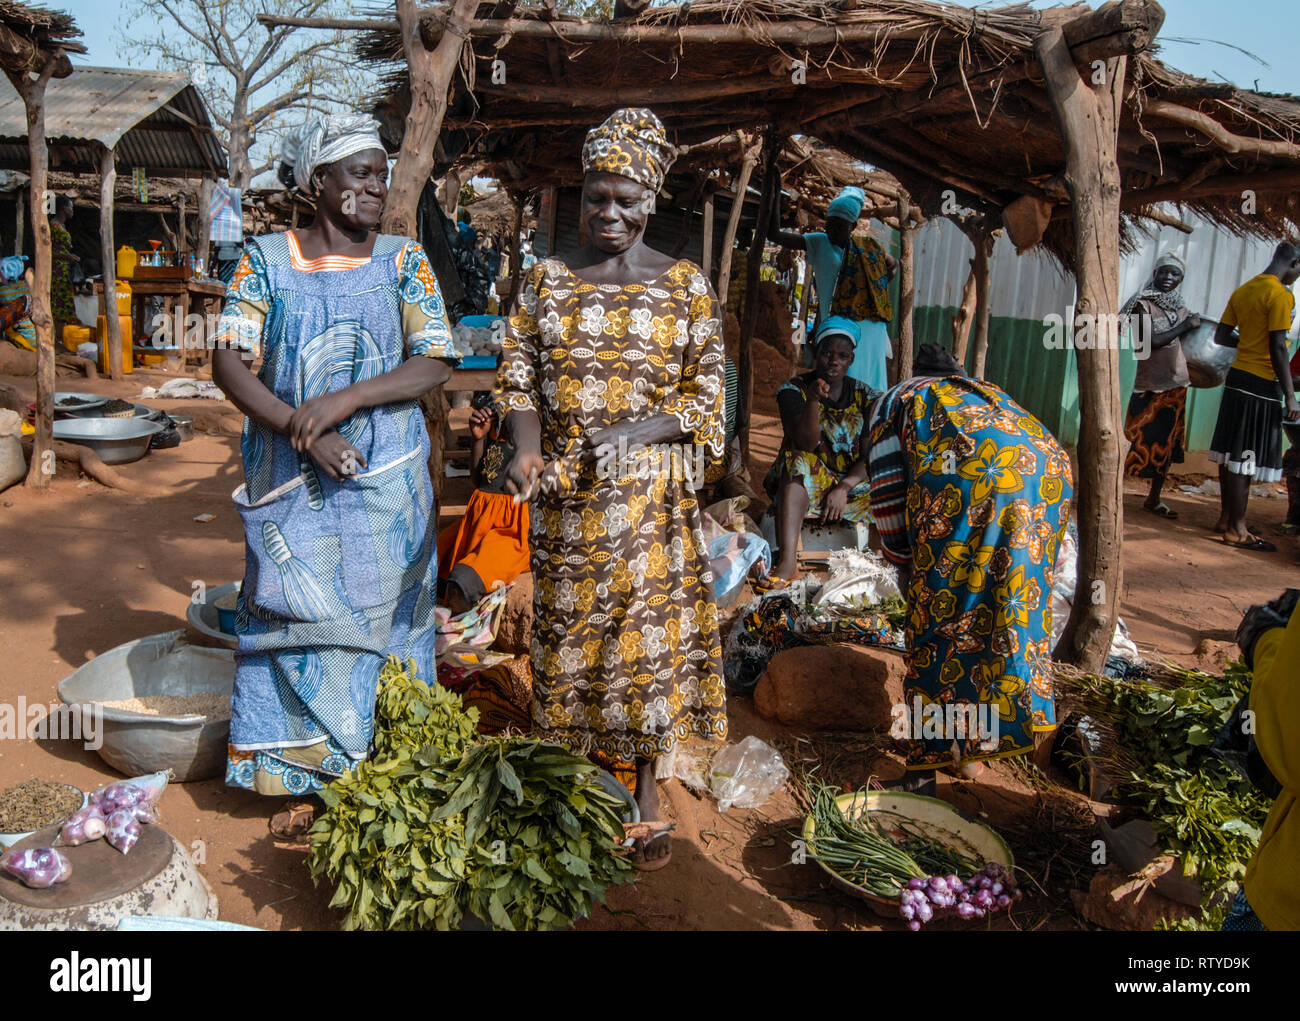 A nice photo of two beautiful Ghanaian women wearing traditional clothes selling vegetables and spices at the local fresh market in Kongo village. Stock Photo